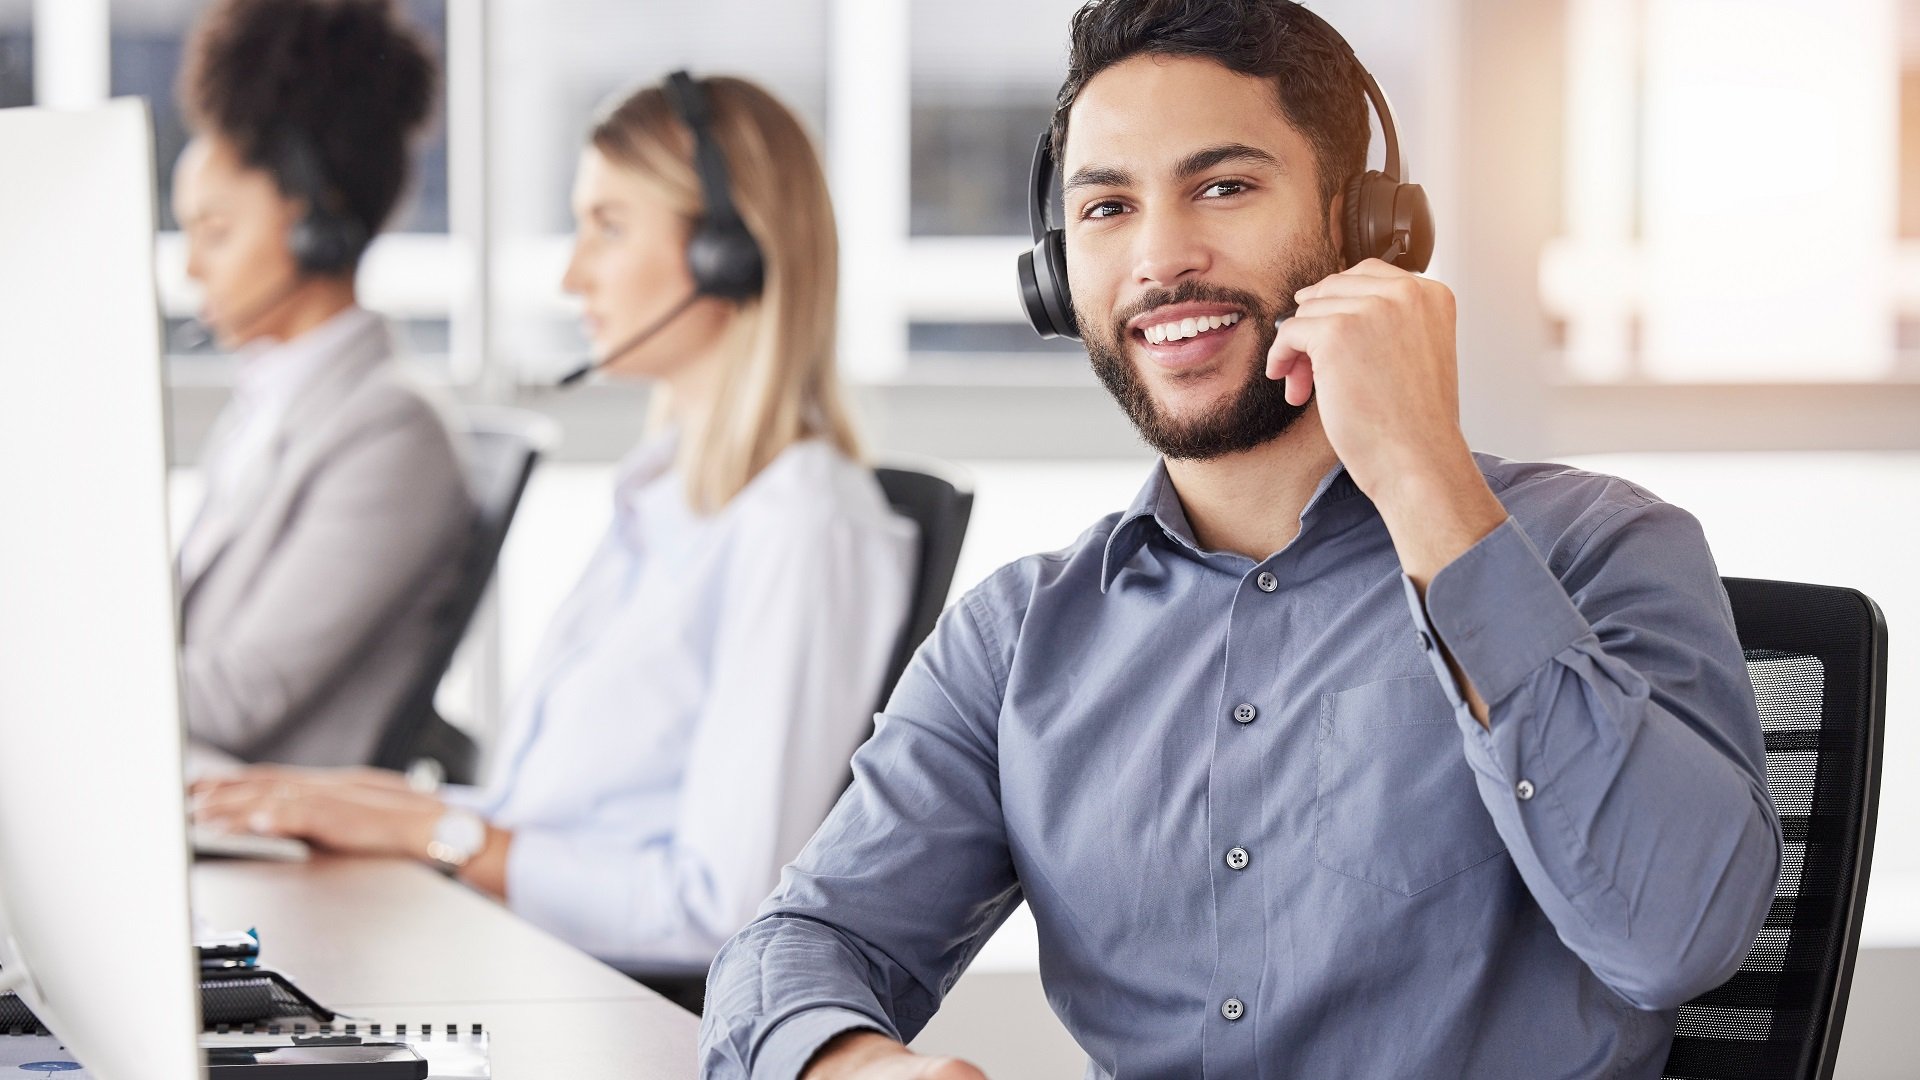 7 Contact Center Metrics to Boost Agent Retention